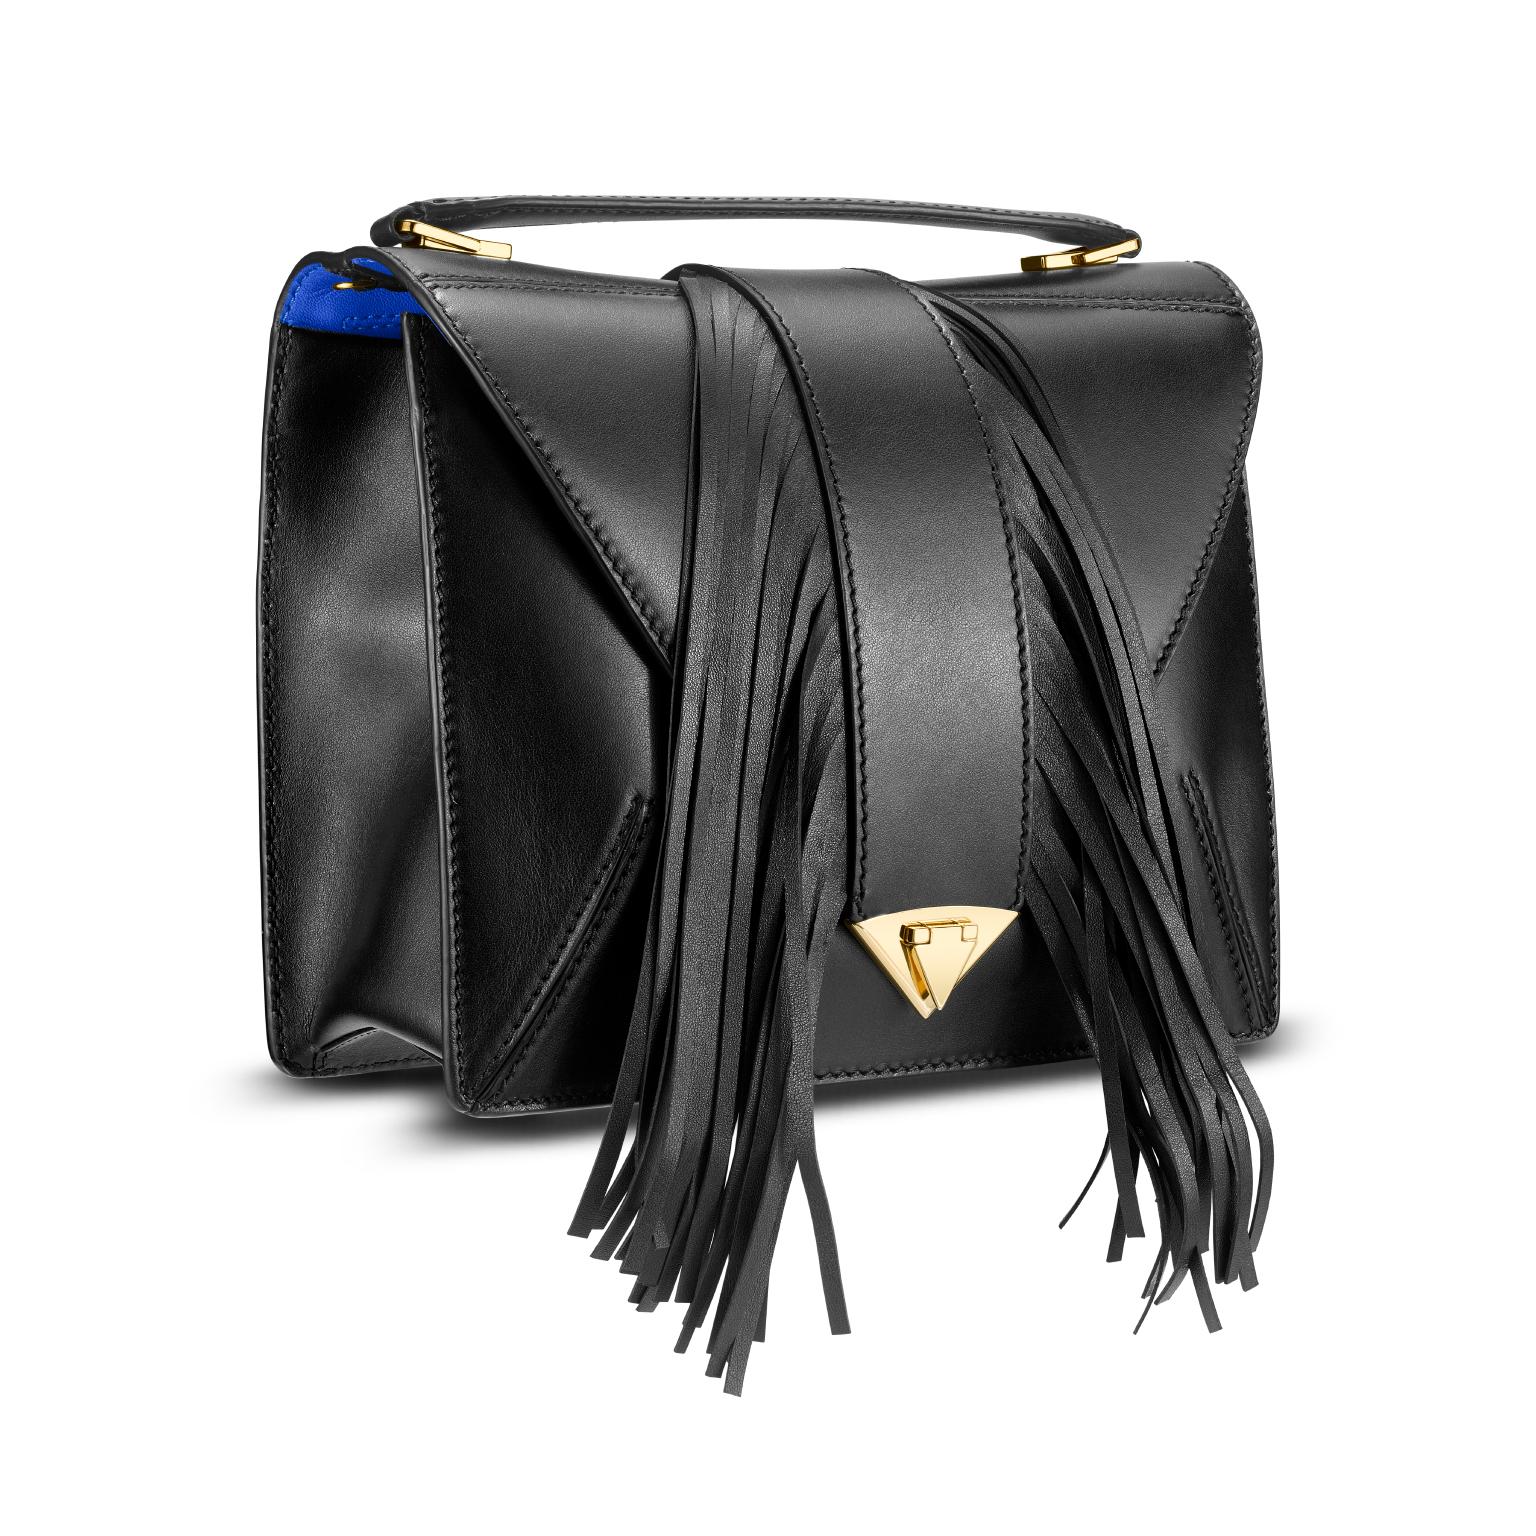 The Rita is featured in Jet Black Leather with fringe detail and gold hardware. This semi-structured handbag has a triangular front-flap, fringe detail and our custom Spear-lock Closure. It is designed with a flexible top handle and an optional